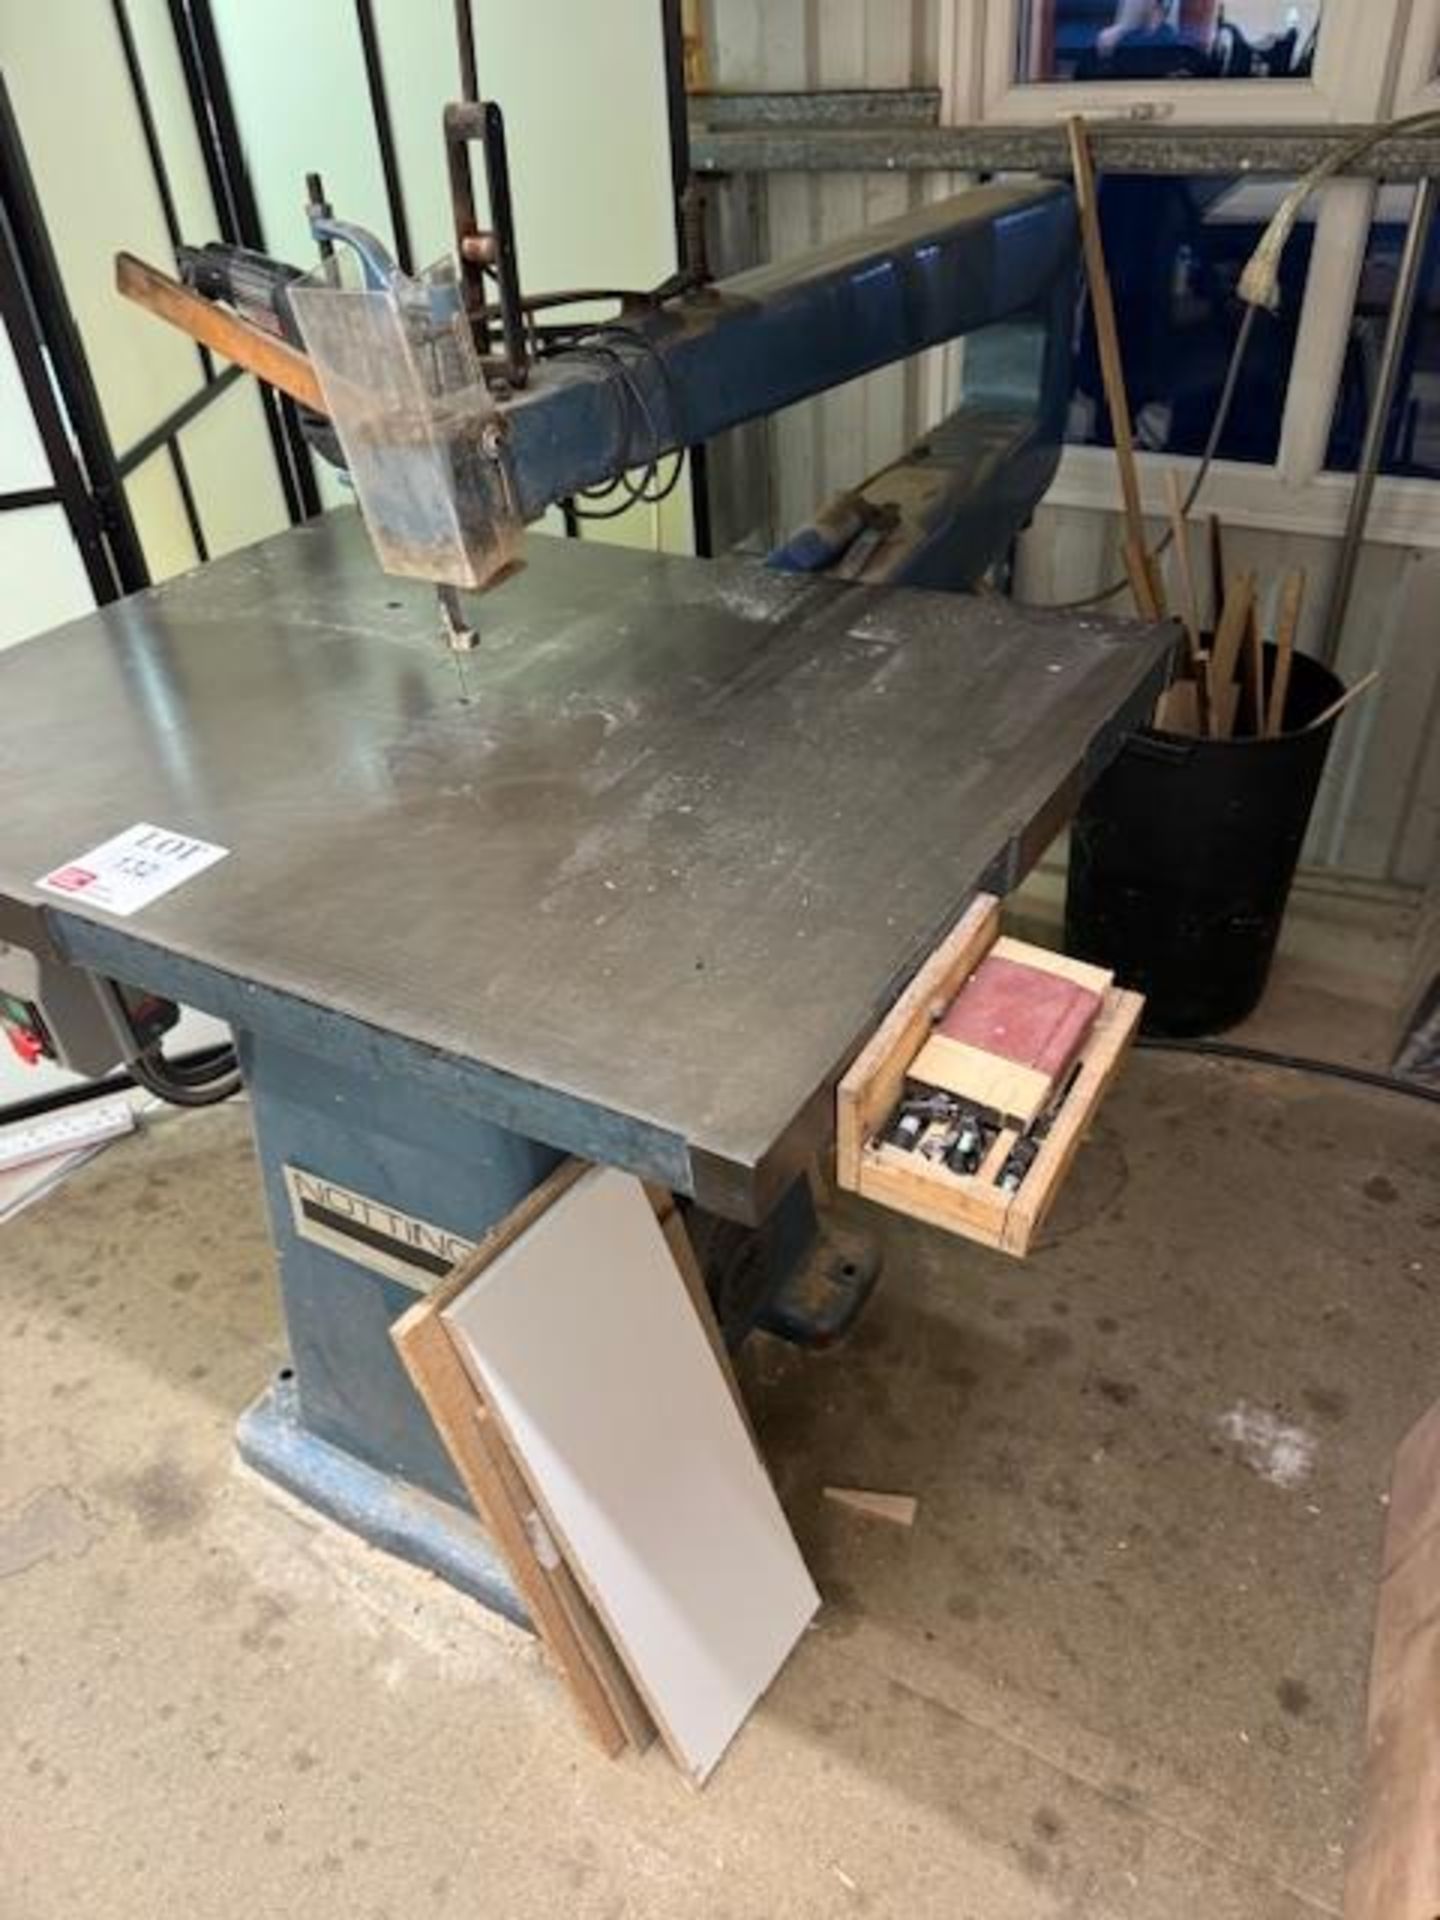 Notting band saw and drill combi, serial no. 740 - Image 2 of 5